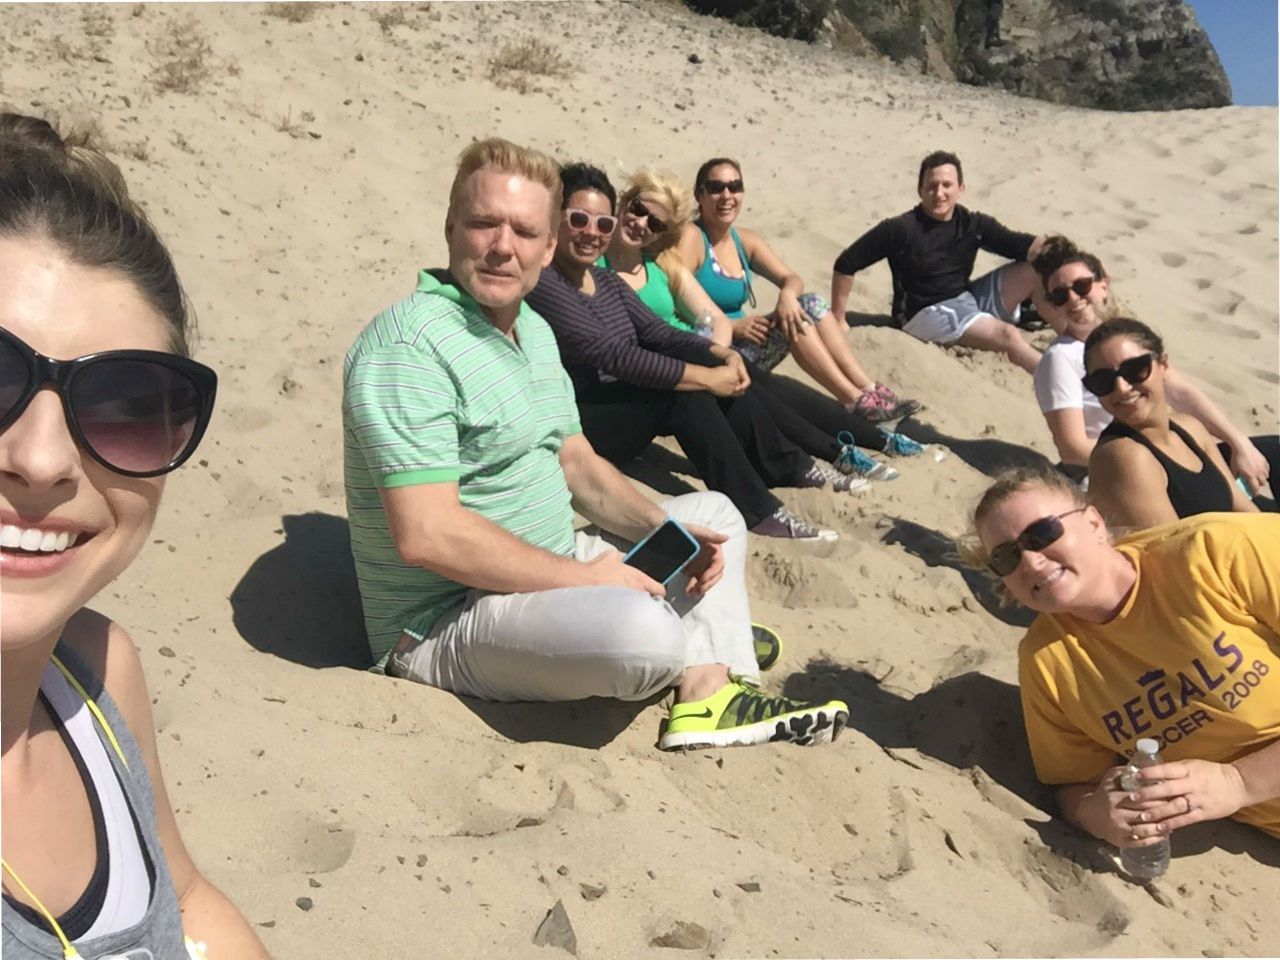 At Marketing Maven, having fun at work is built into the company culture. CEO Lindsey Carnett (bottom right) and her team keep things real by taking time together to celebrate their wins.